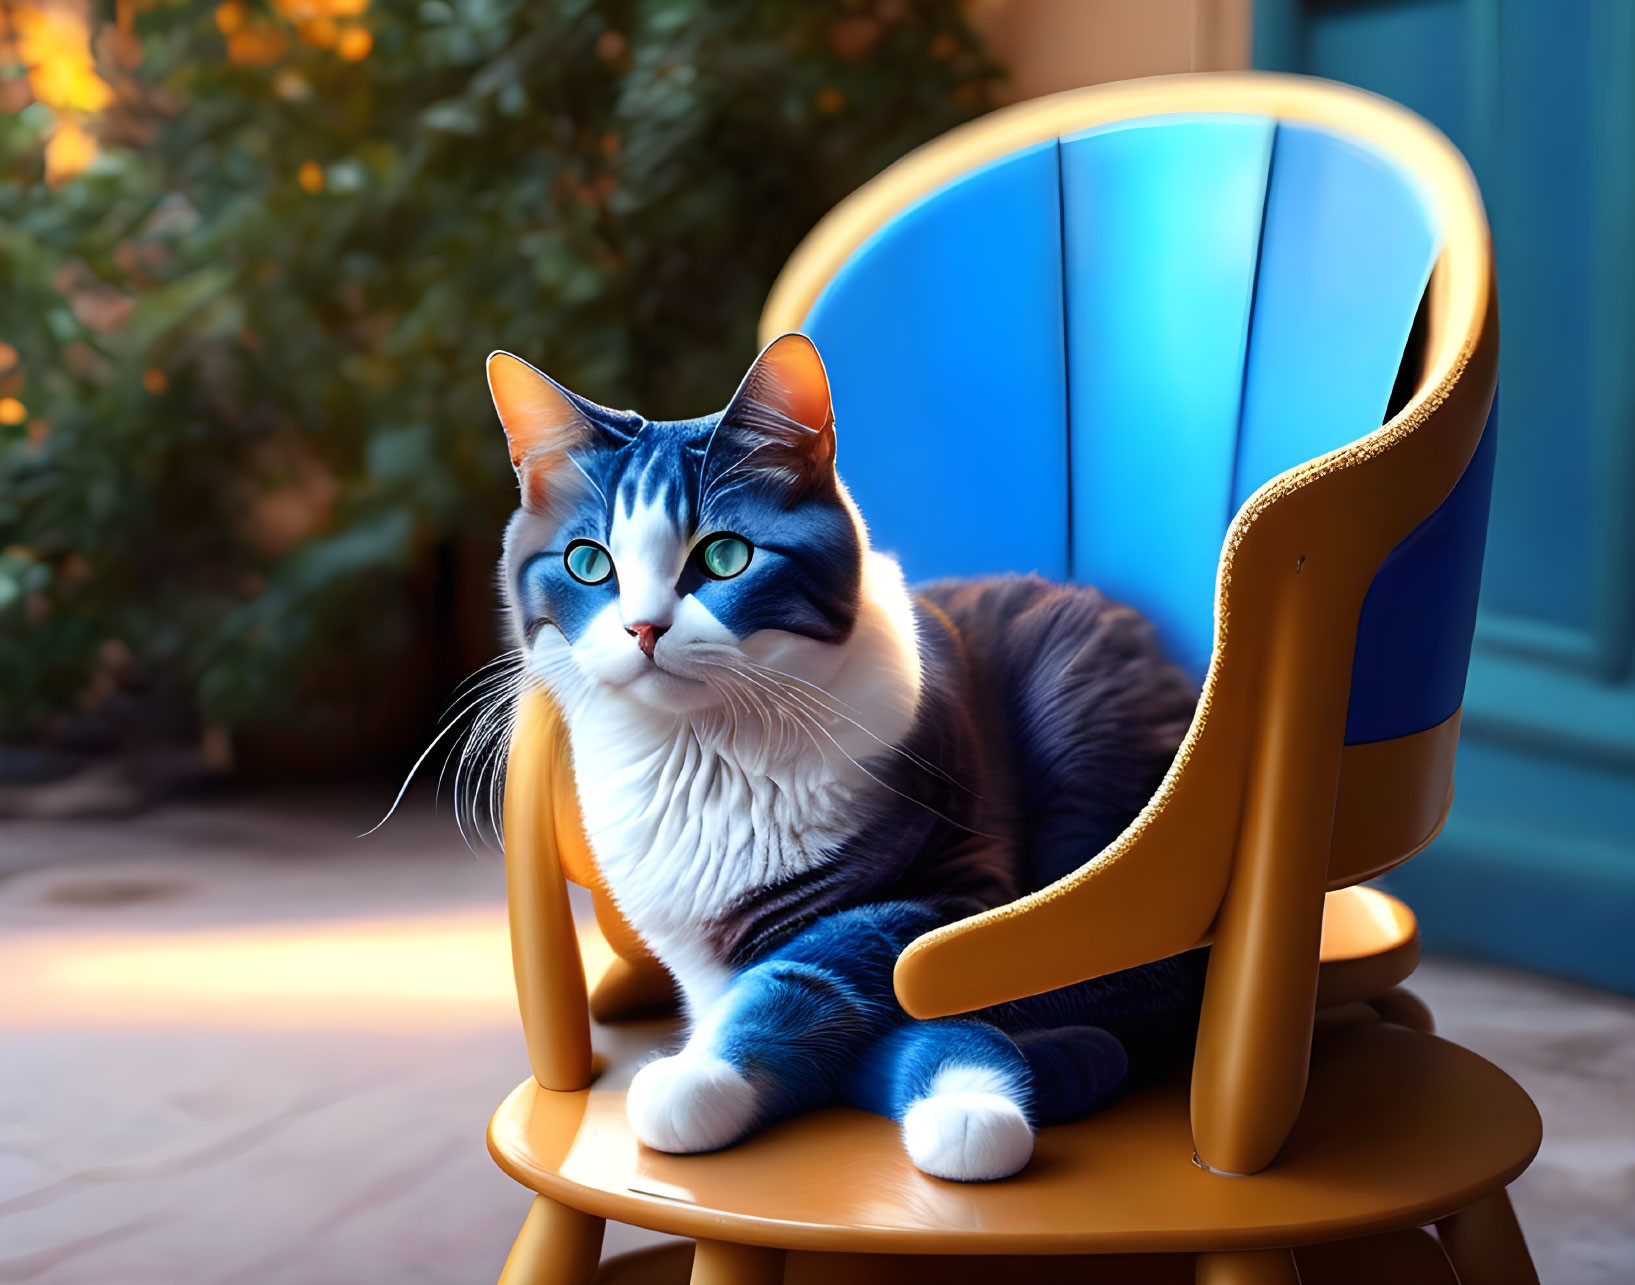 Blue and White Cat with Blue Eyes on Yellow Chair in Warm Background